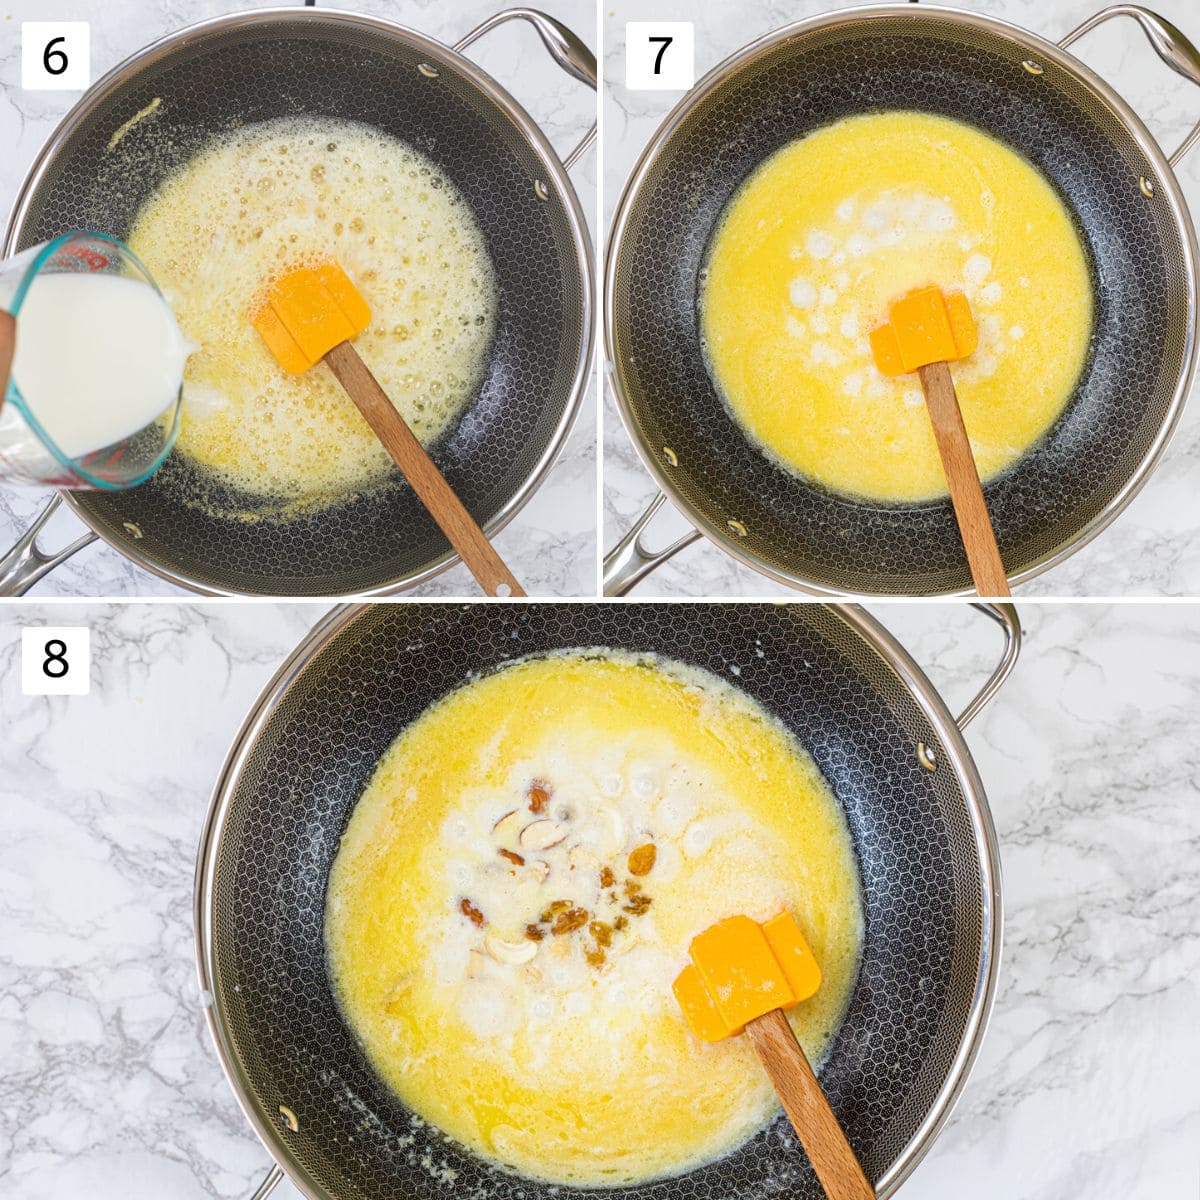 Collage of 3 images showing adding and mixing milk into roasted semolina.